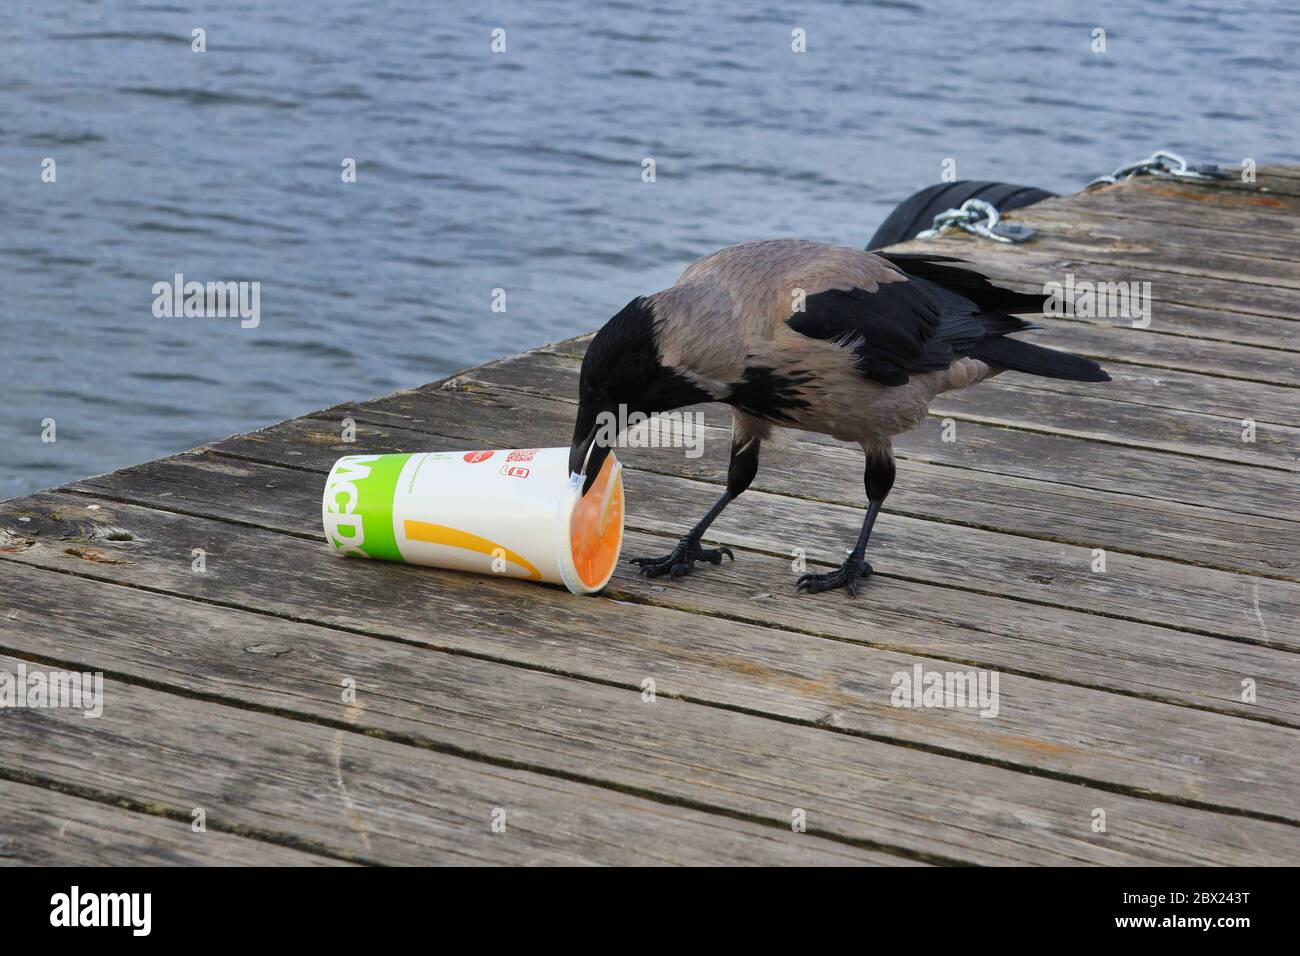 Hooded crow, corvus cornix, is pecking the plastic lid of McDonalds soft drink container and cutting it open to access the yellow soda drink inside. Stock Photo